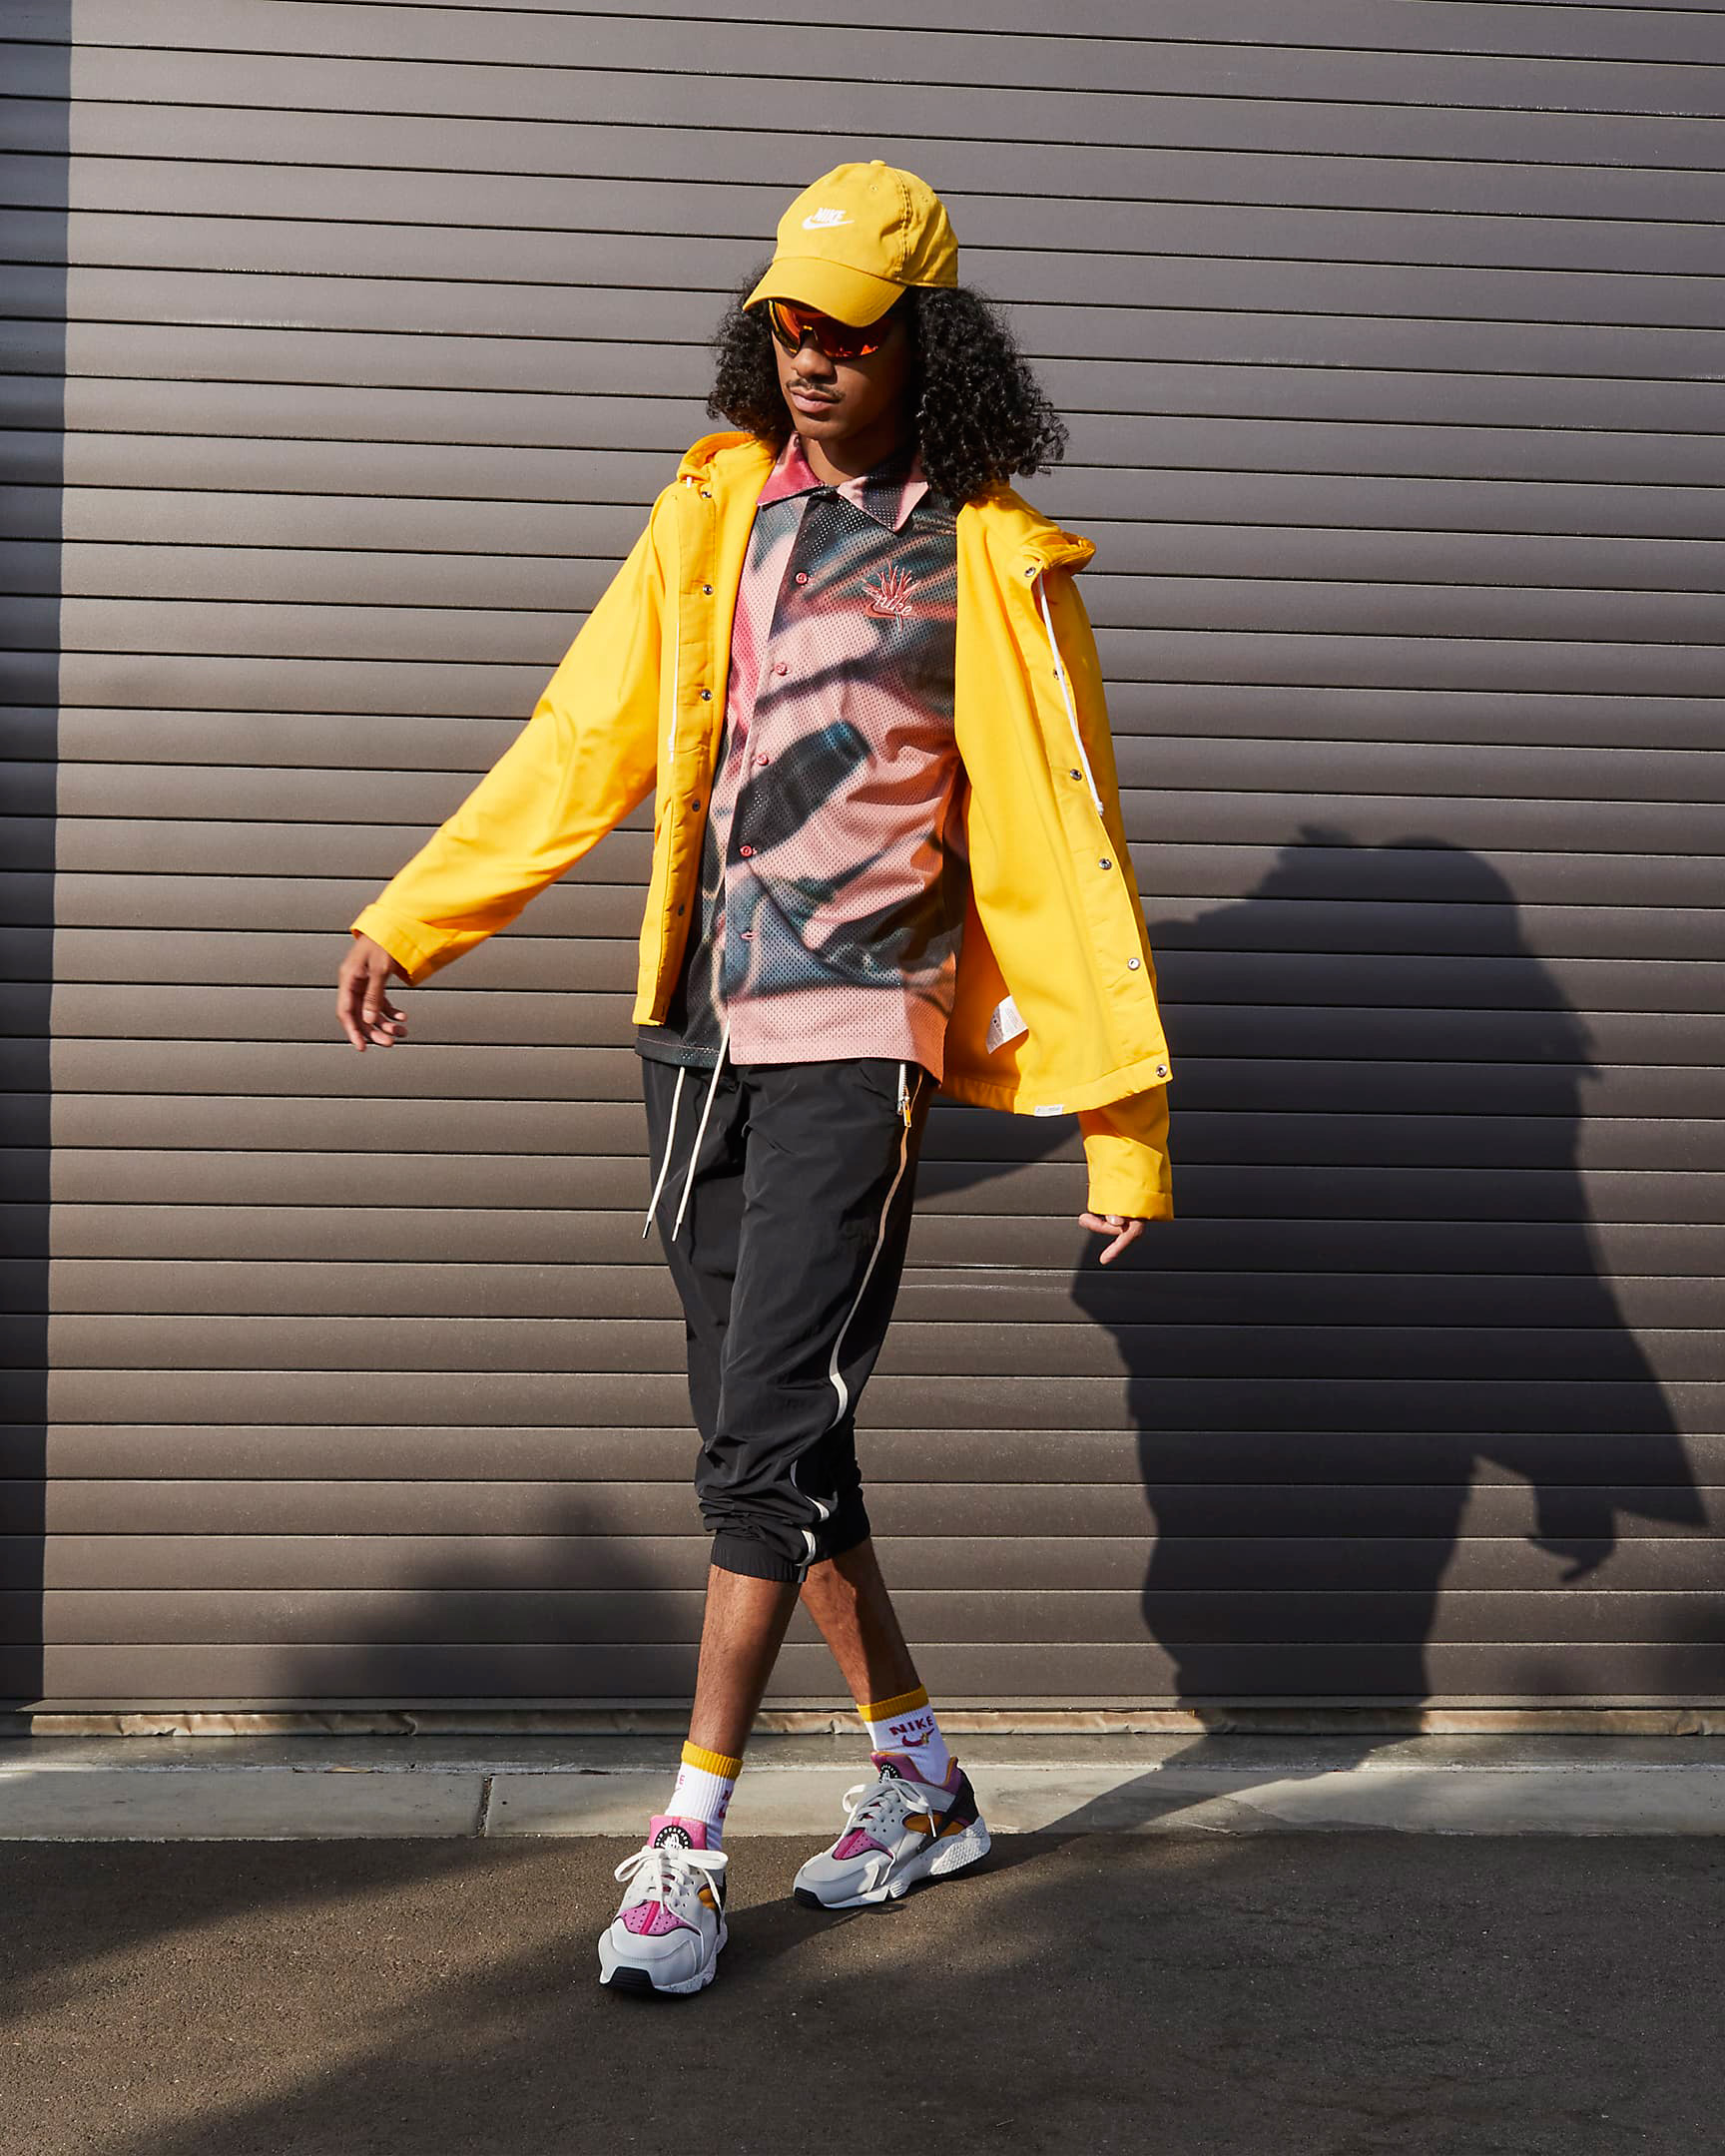 nike-air-huarache-university-gold-pink-clothing-outfit-match